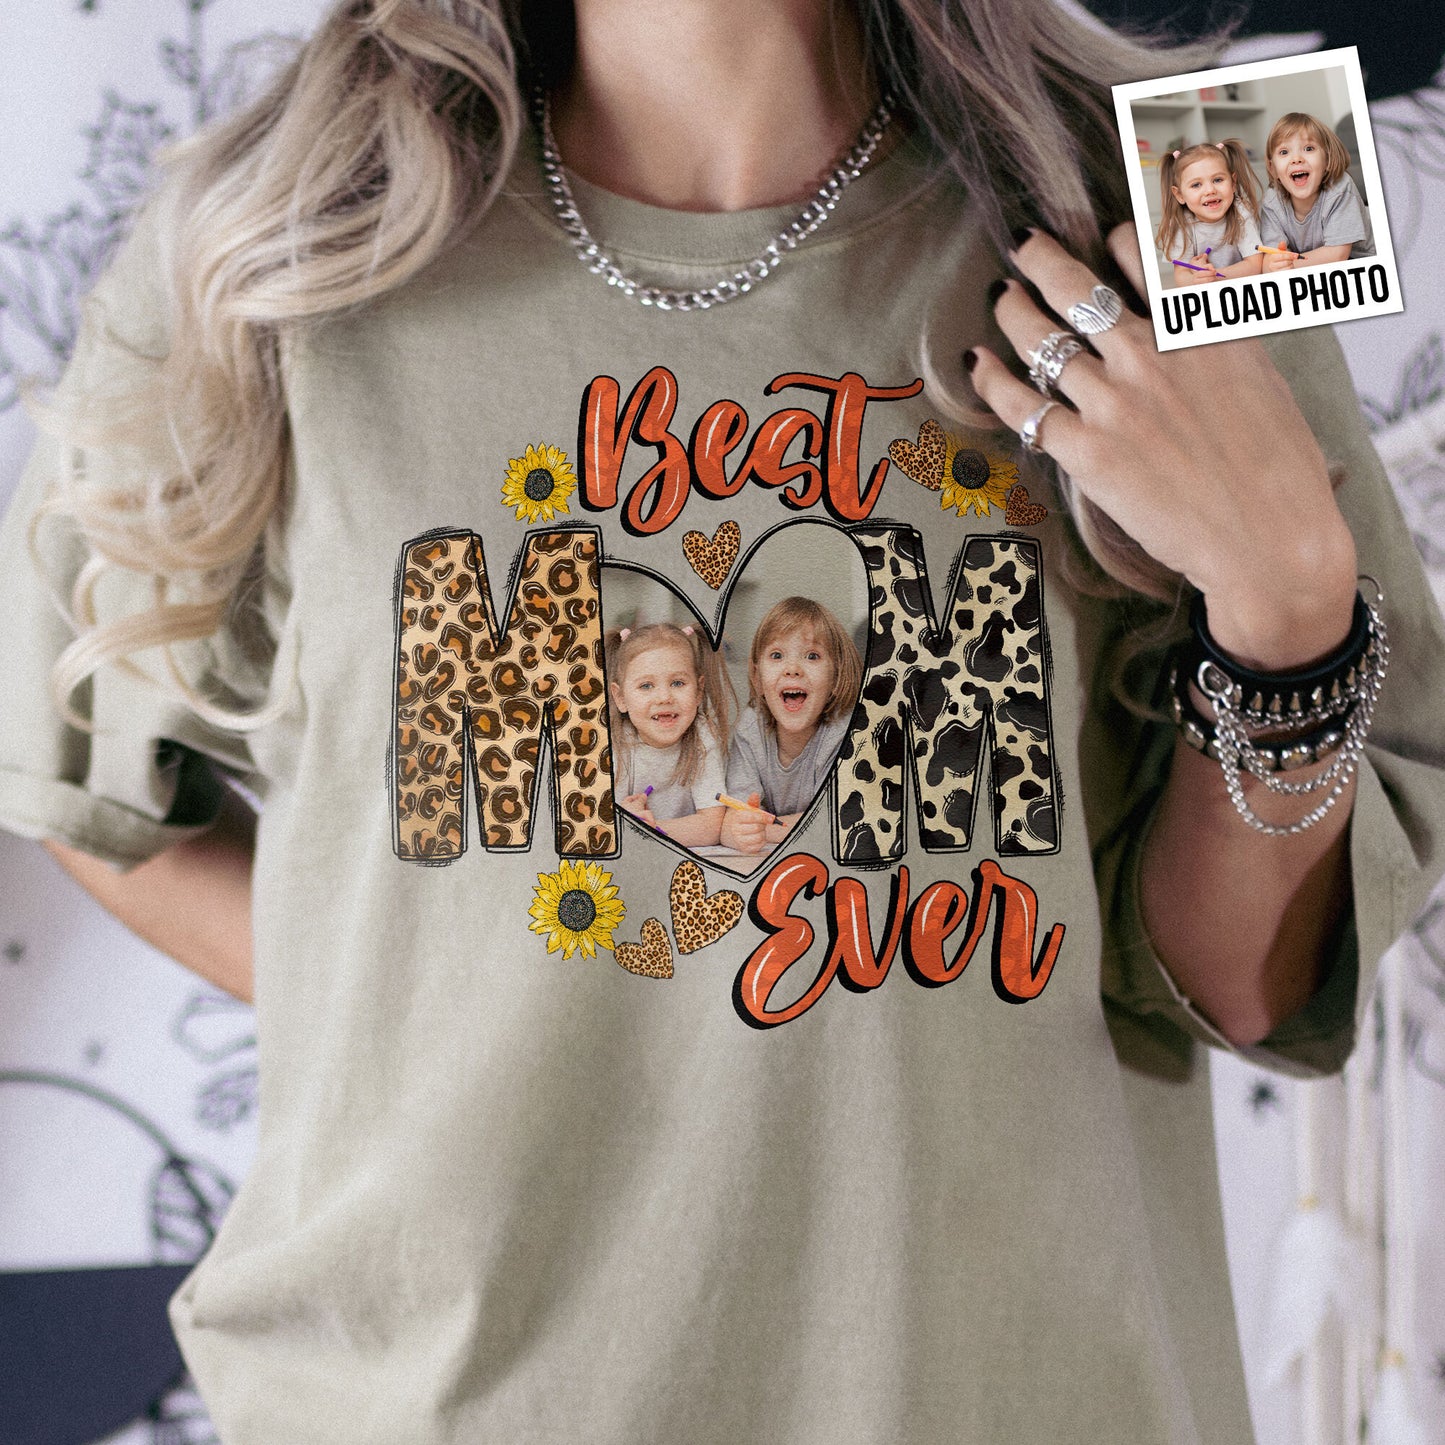 The Best Mom - Personalized Photo Comfort Tee